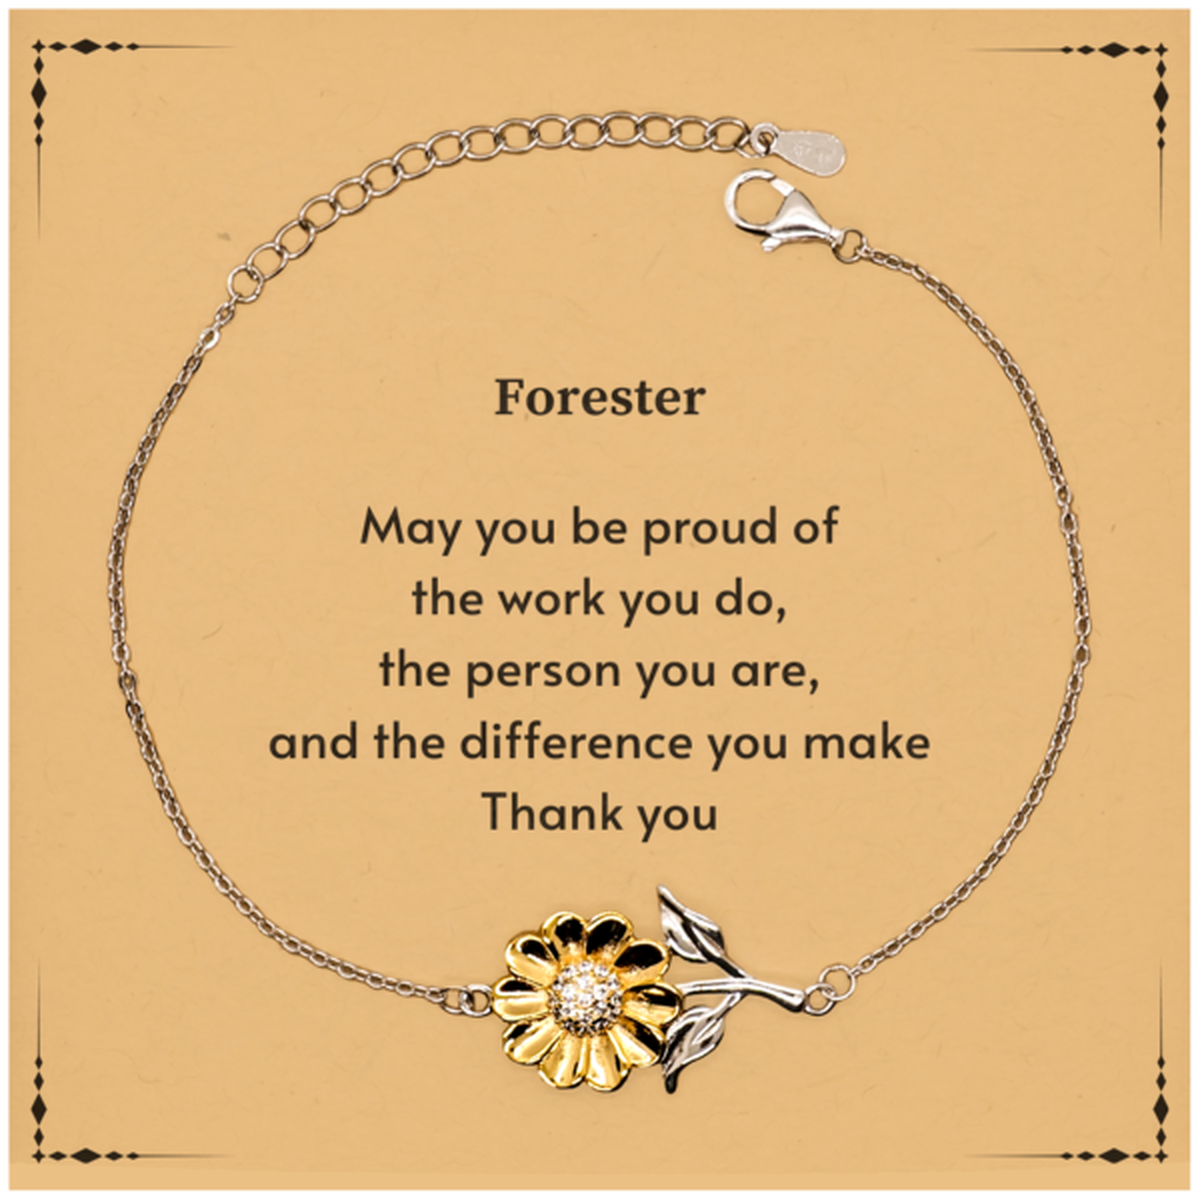 Heartwarming Sunflower Bracelet Retirement Coworkers Gifts for Forester, Forester May You be proud of the work you do, the person you are Gifts for Boss Men Women Friends